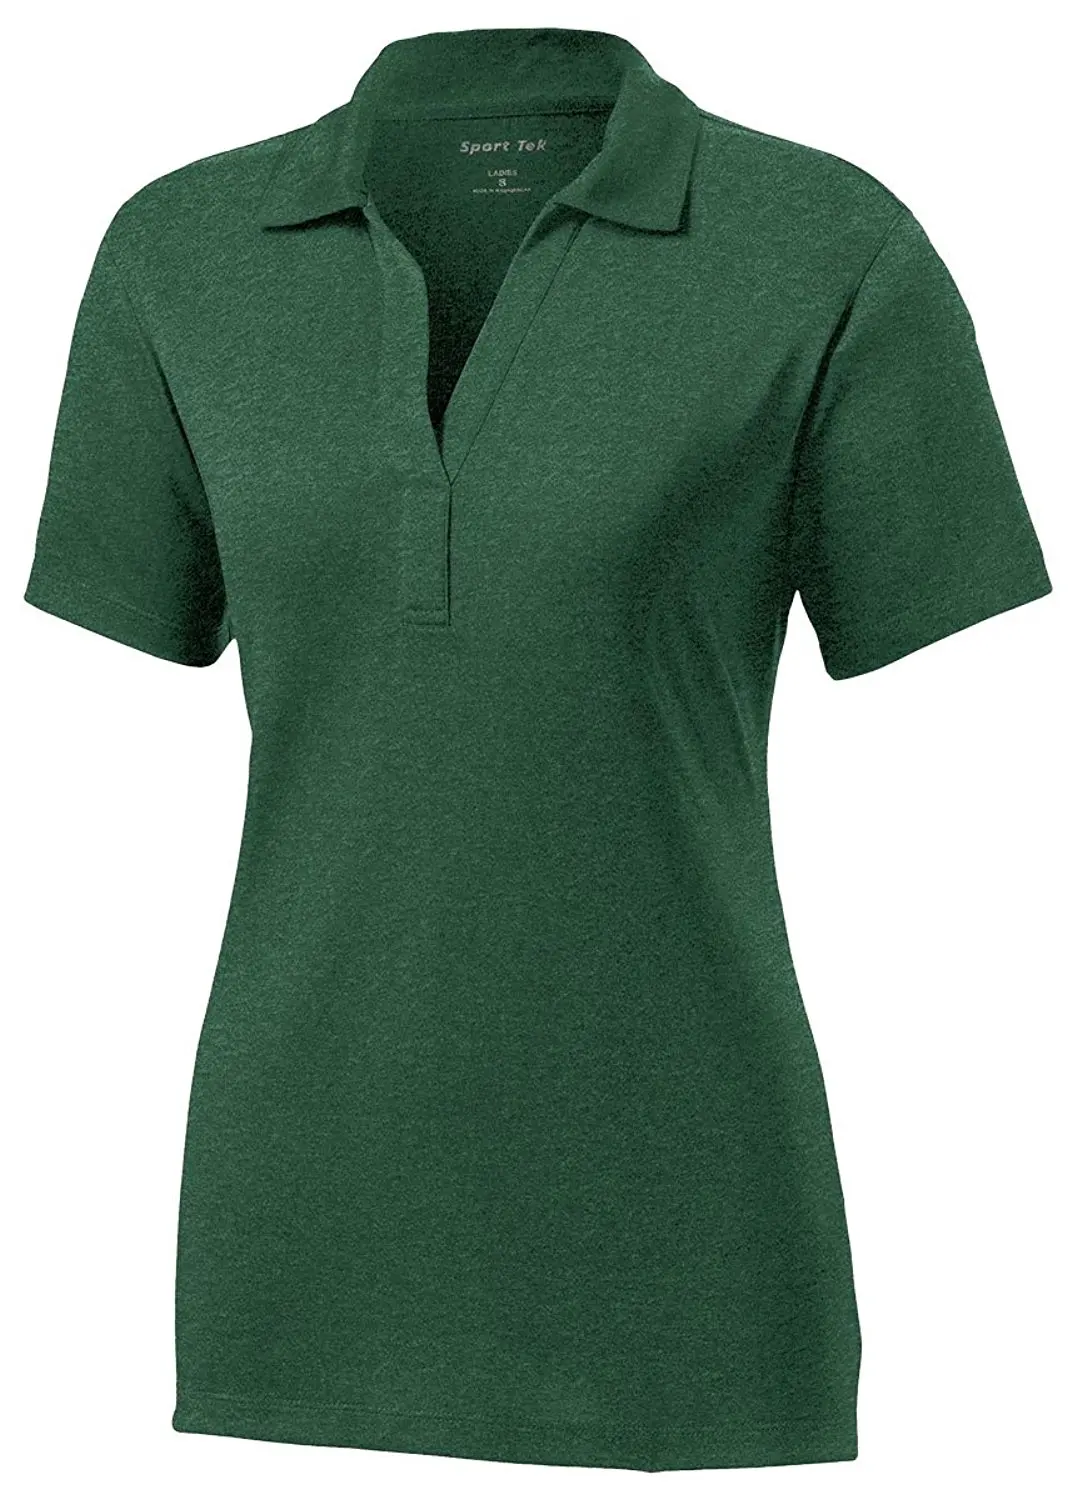 green polo shirts for ladies